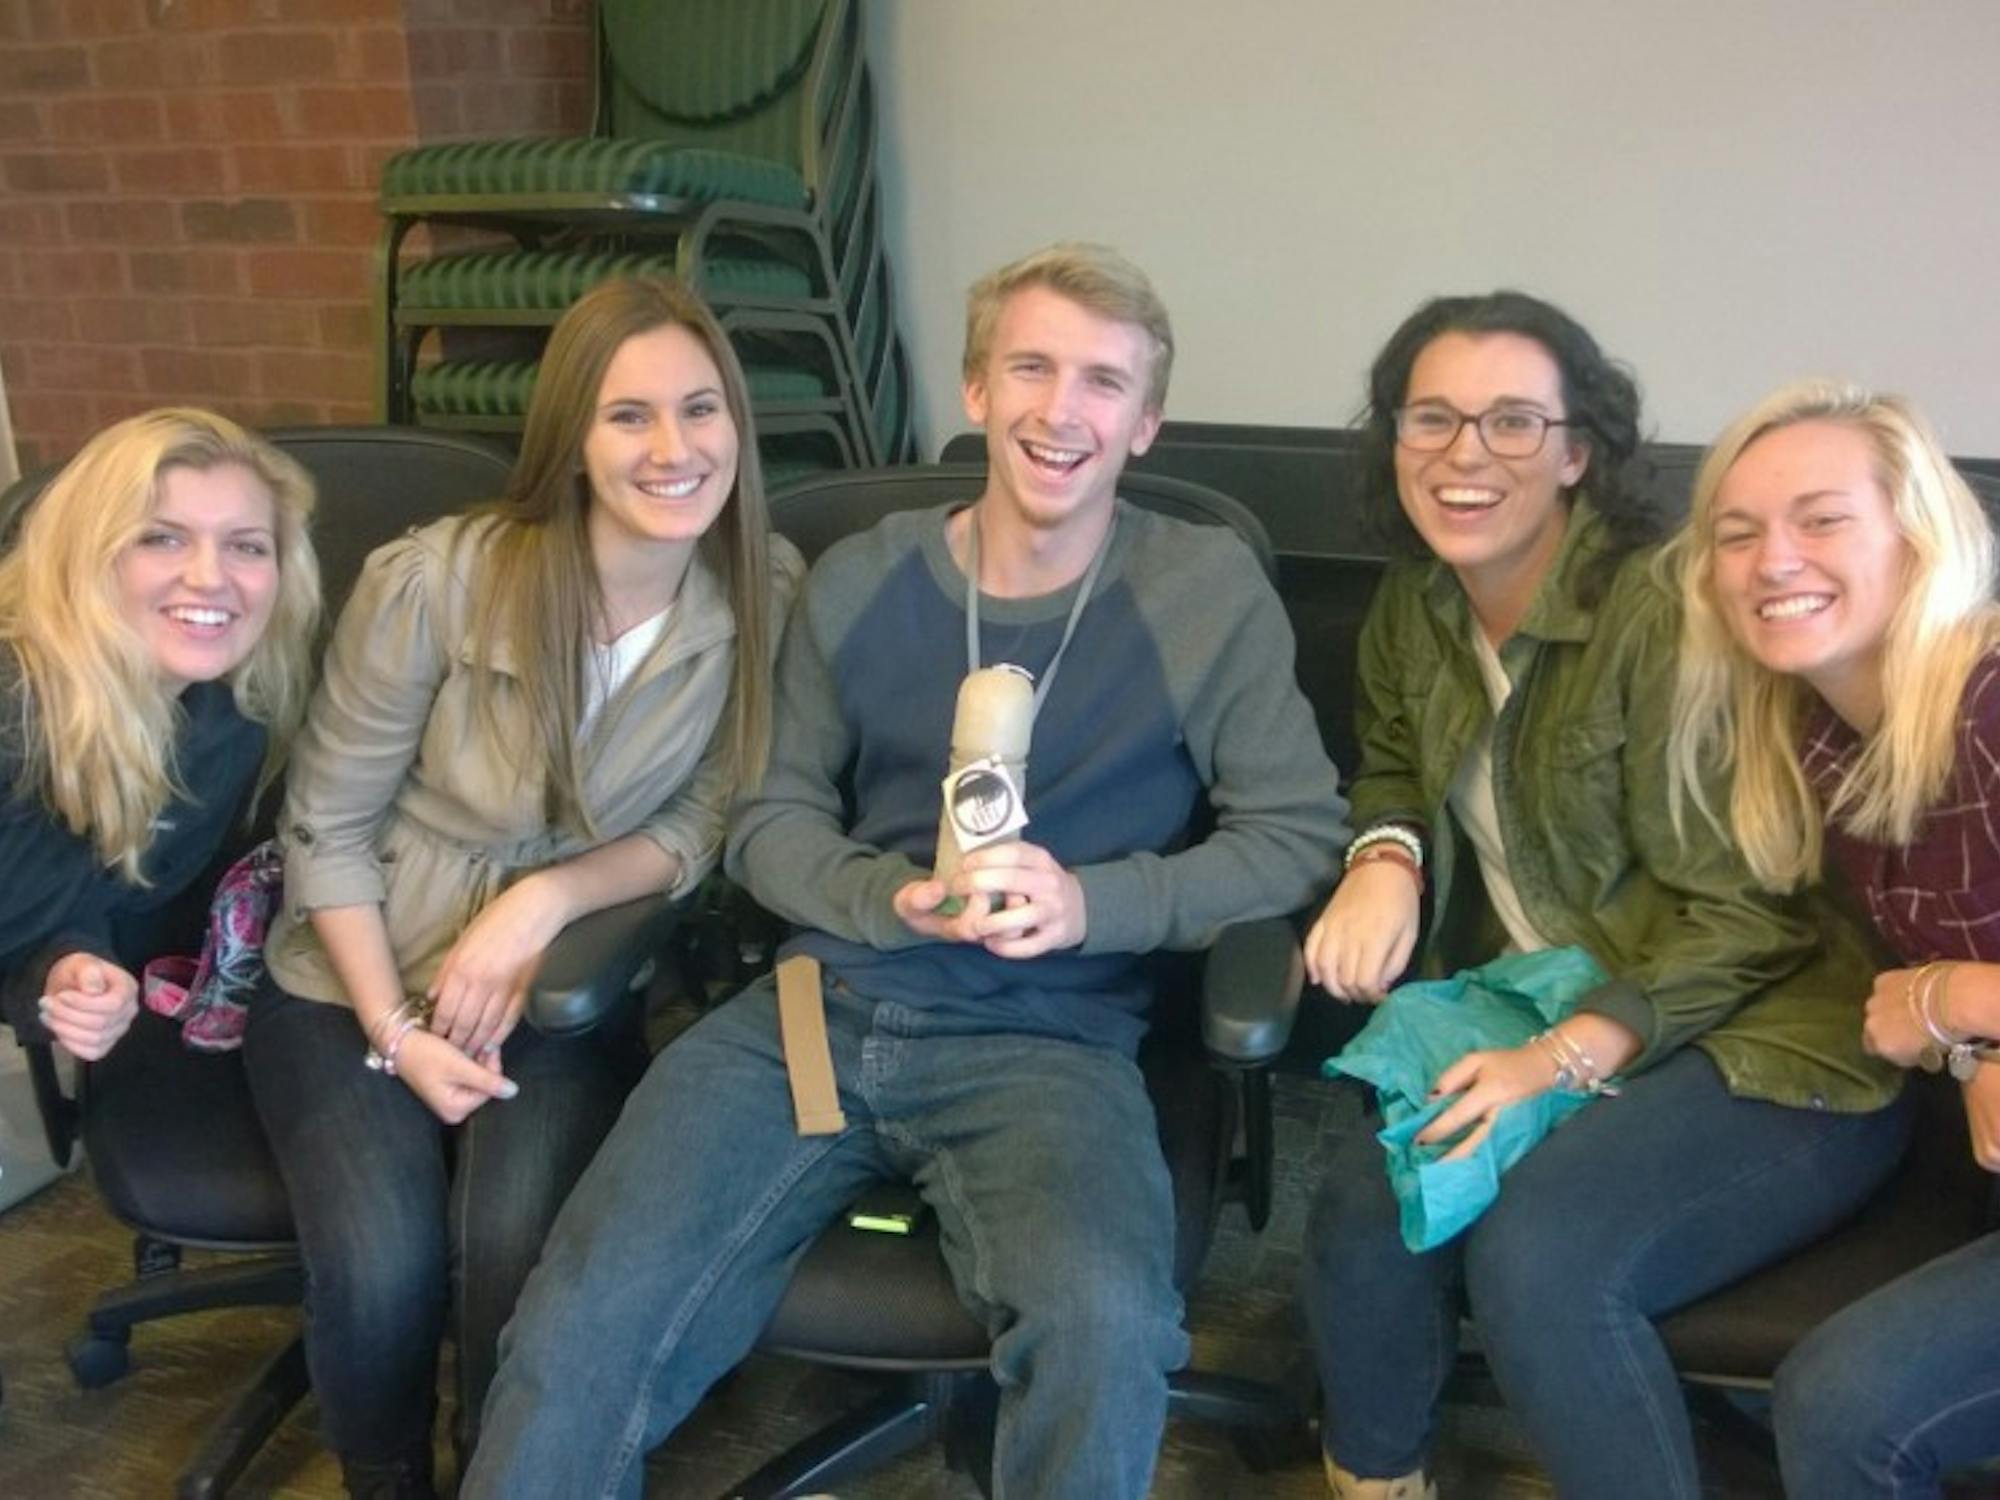 The winning group won a candle in the shape of the Water Tower. From right to left: Erin Beyer, Alyssa Licavoli, Rob Cottrell, Adrianna Sputa and Kate Mueller.